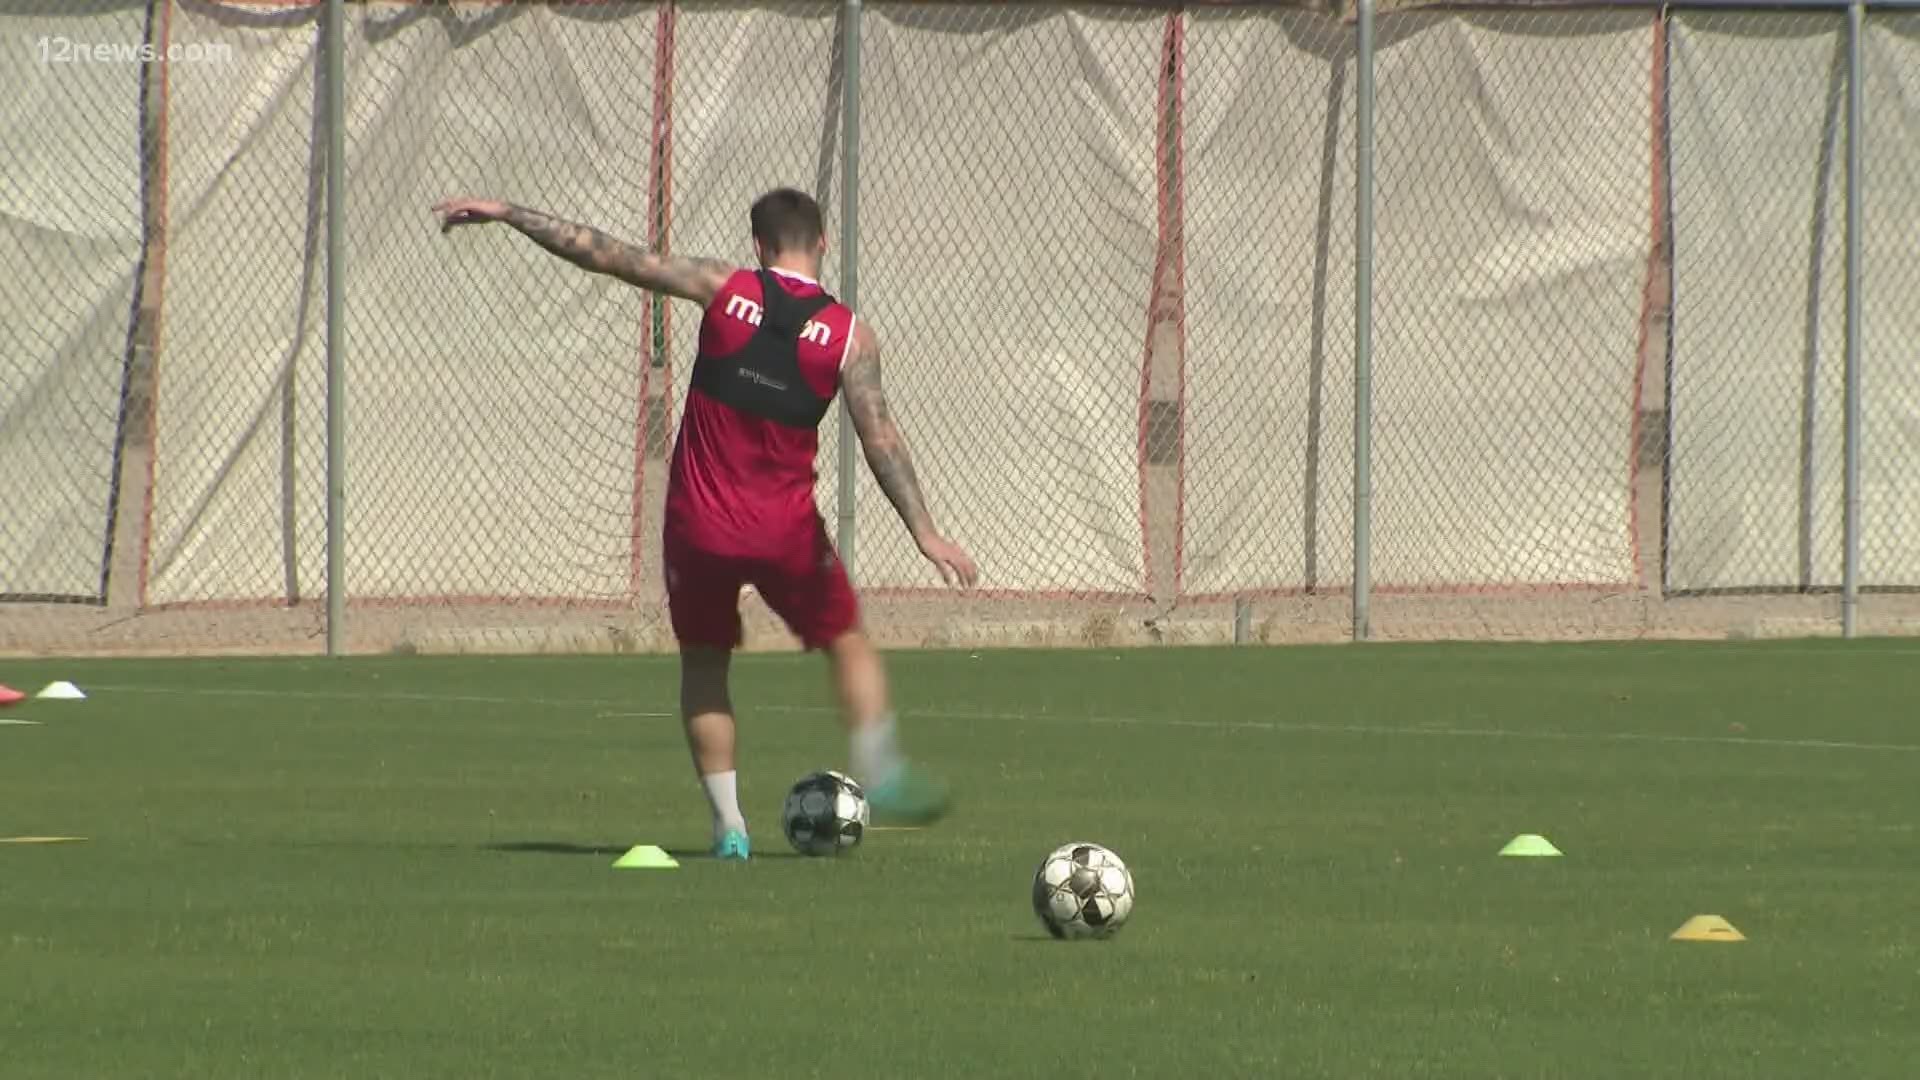 Hope is on the horizon for Phoenix Rising fans. The Valley's pro soccer team resumed practice on Monday.